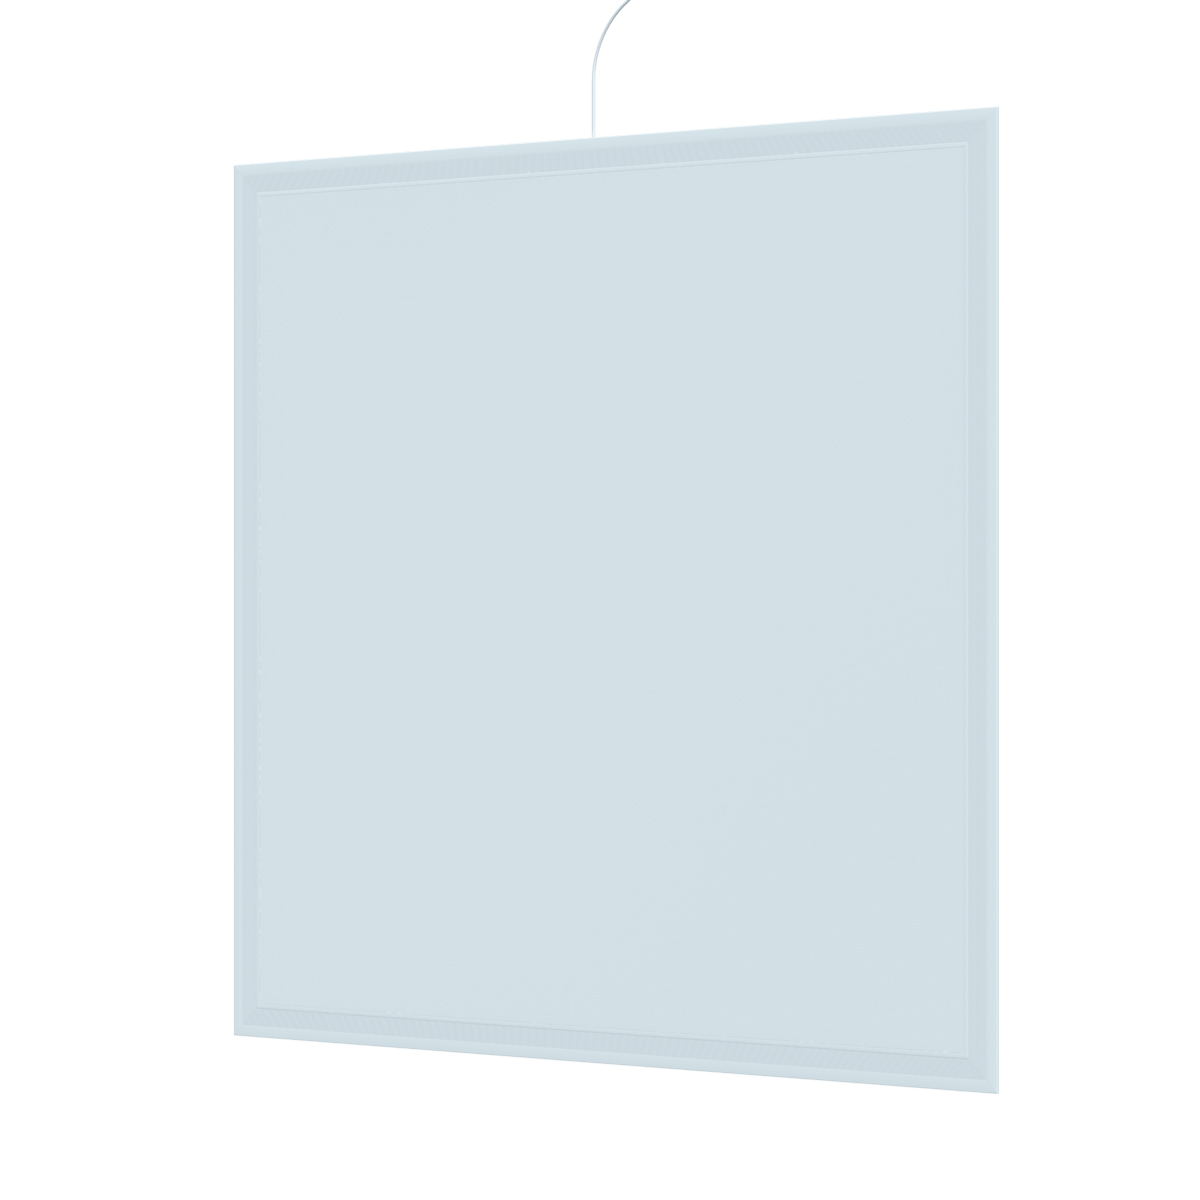 Image of 600x600mm LED Panel Light, 40w - Cool White 6000K - 5 Year Warranty